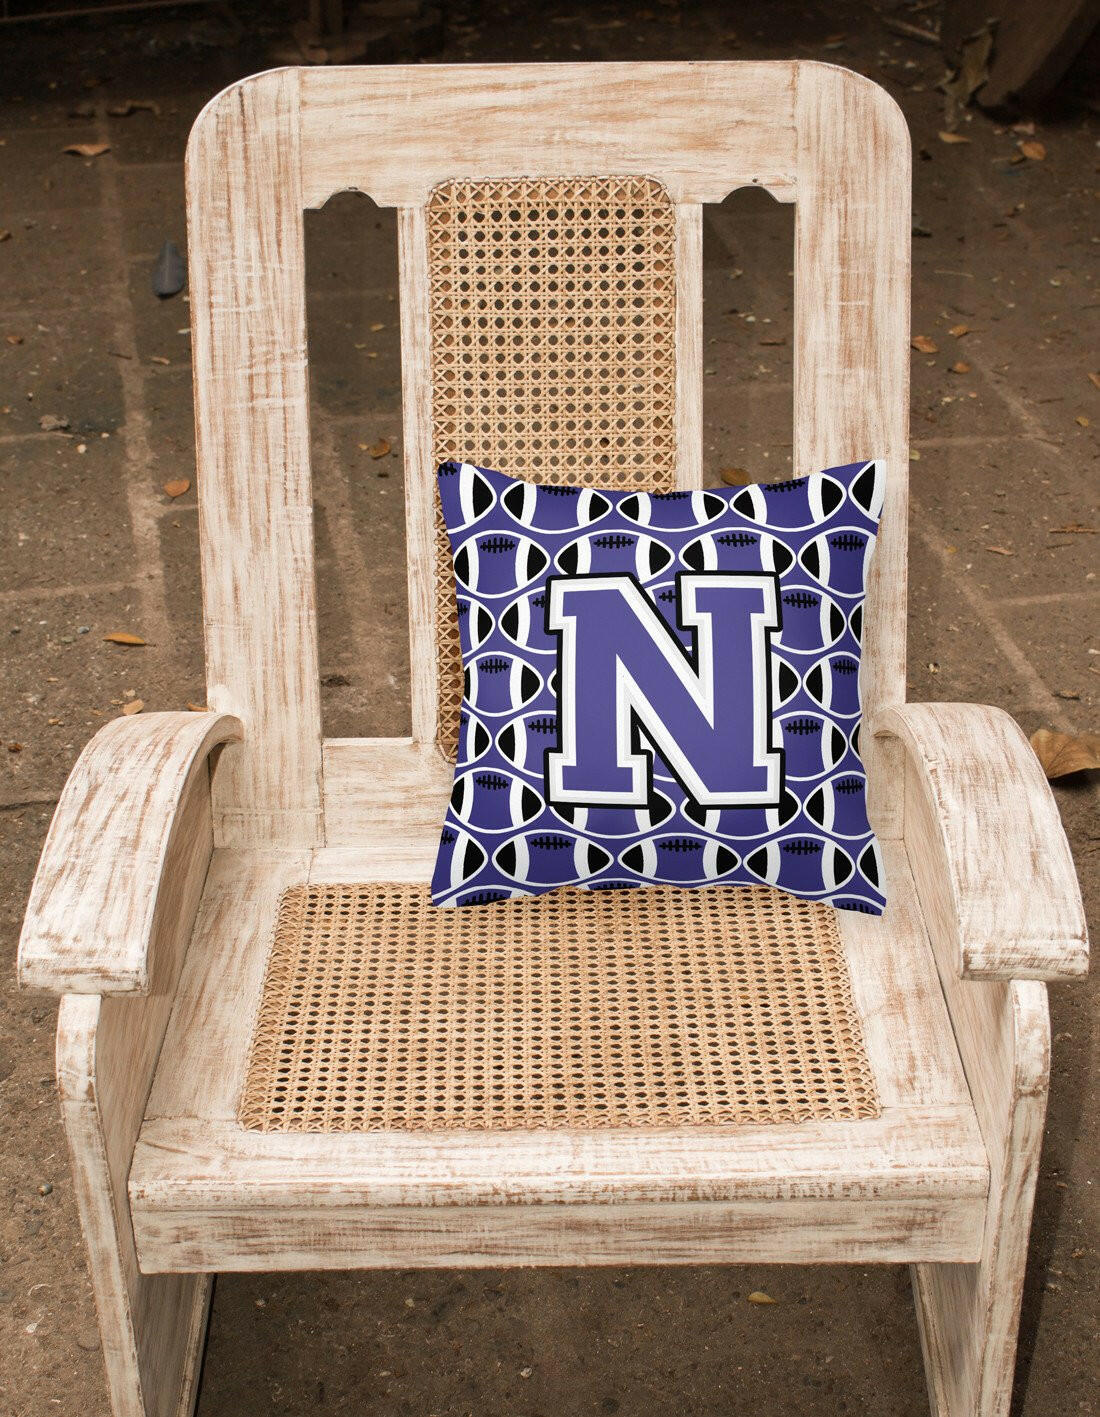 Letter N Football Purple and White Fabric Decorative Pillow CJ1068-NPW1414 by Caroline's Treasures